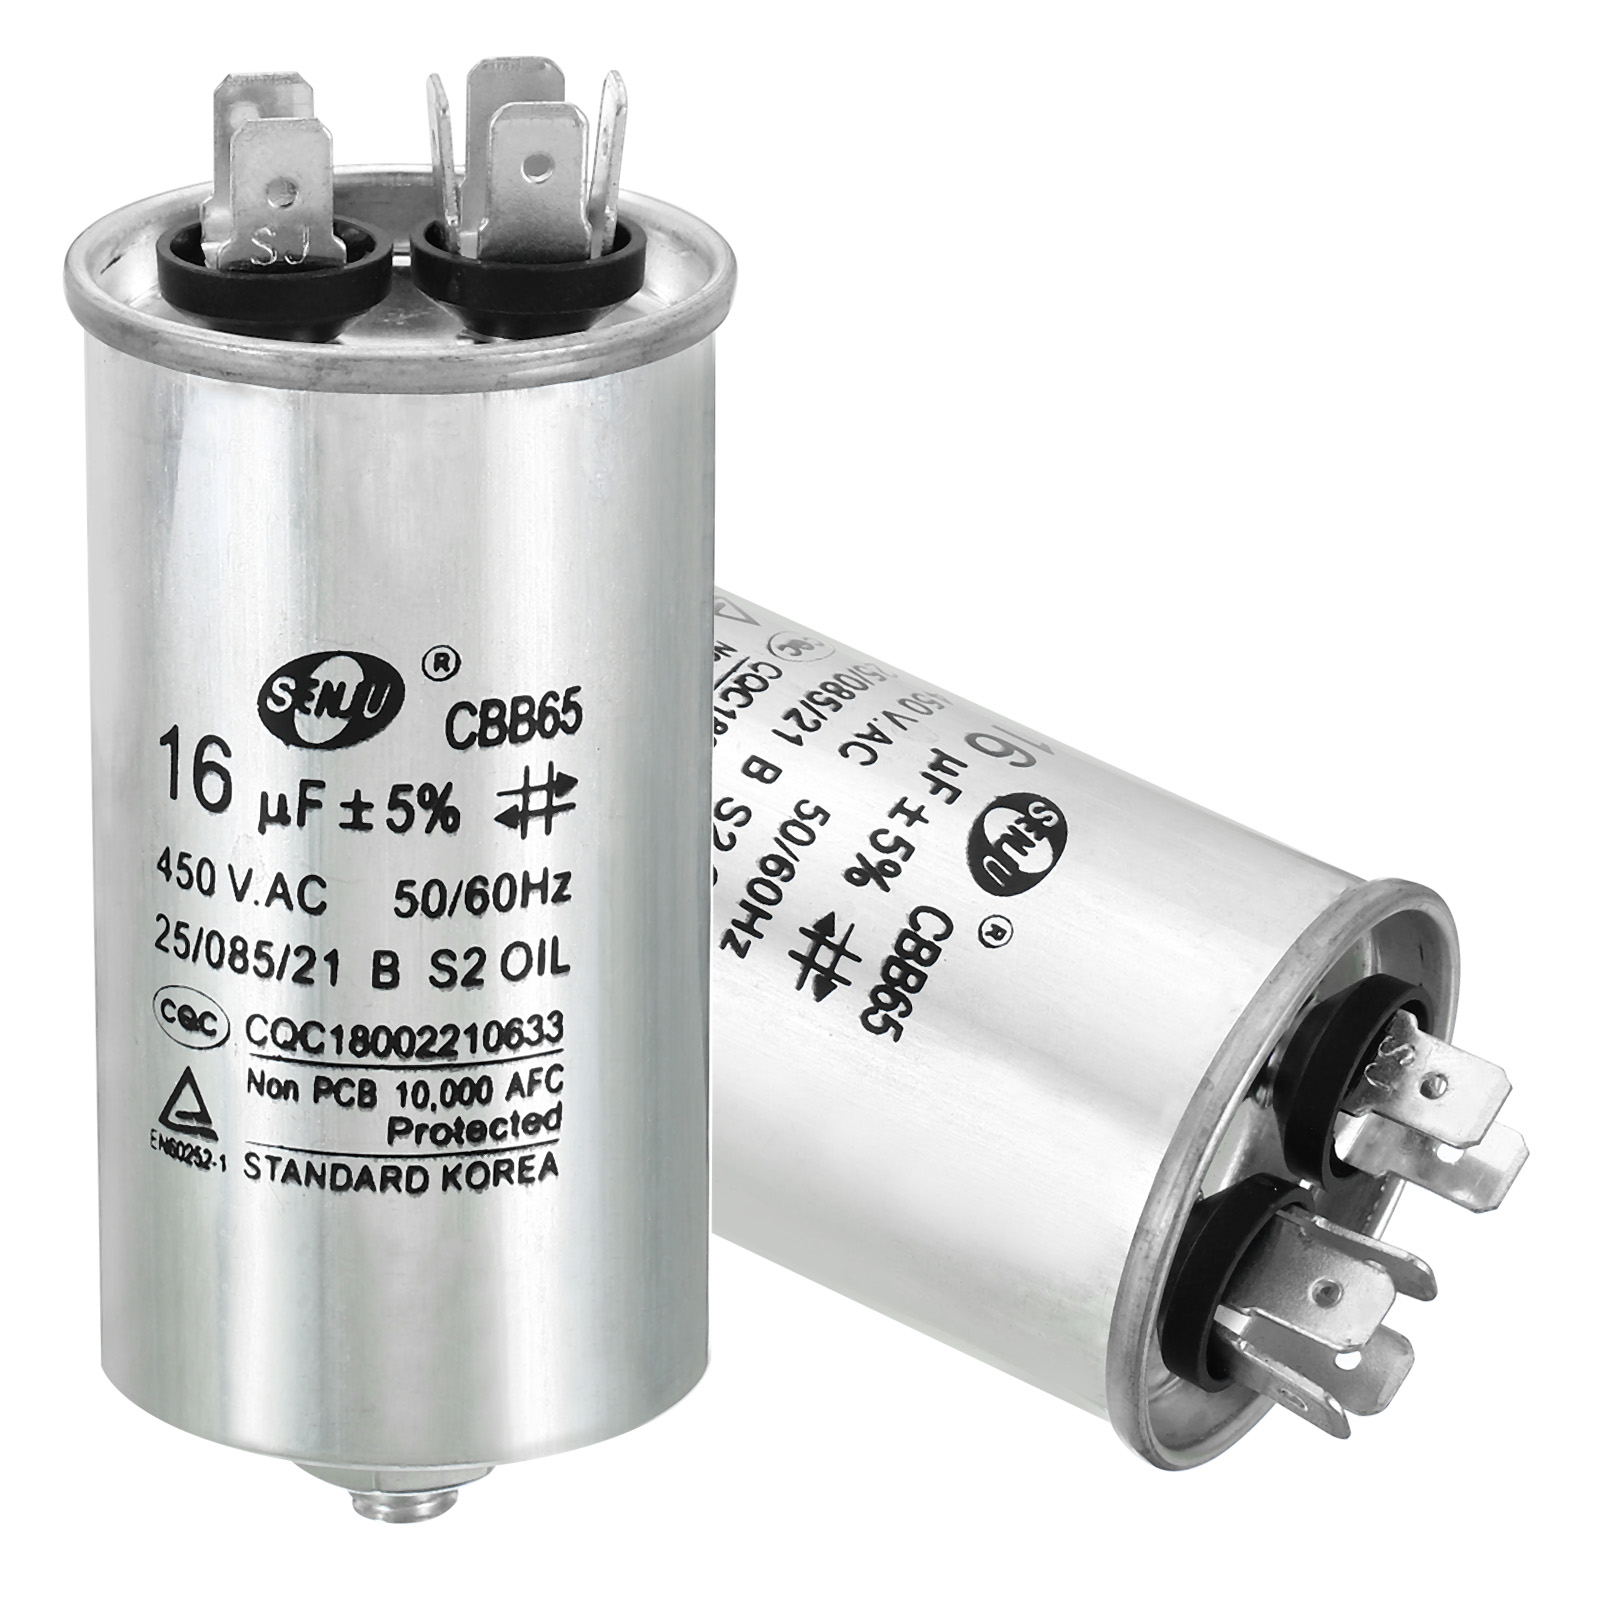 16uF 16MDF 450VAC Fan Start Capacitor, CBB65 Circular Run Capacitor with Screws for Air Conditioner - image 3 of 5